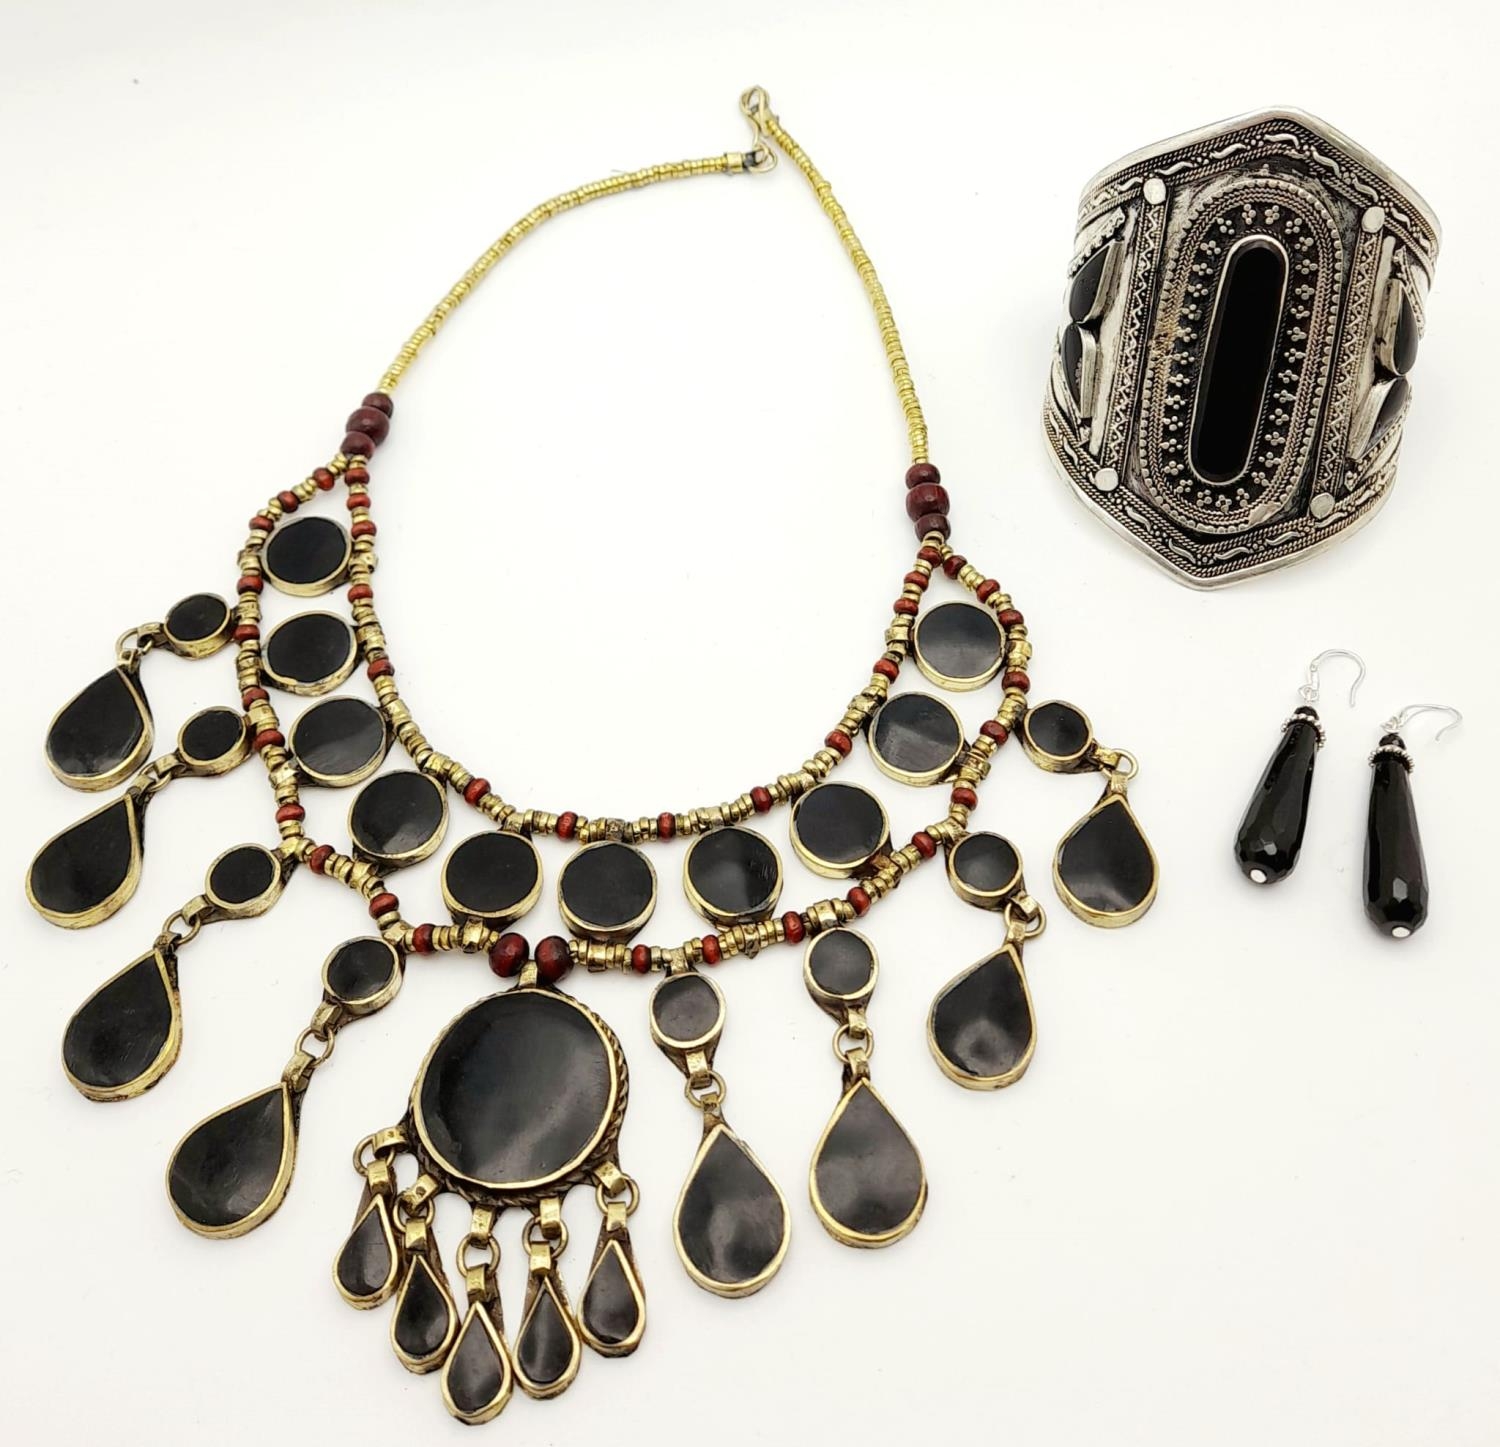 A Black Agate Jewellery Set: Cuff bangle, drop earrings and necklace - 42cm.